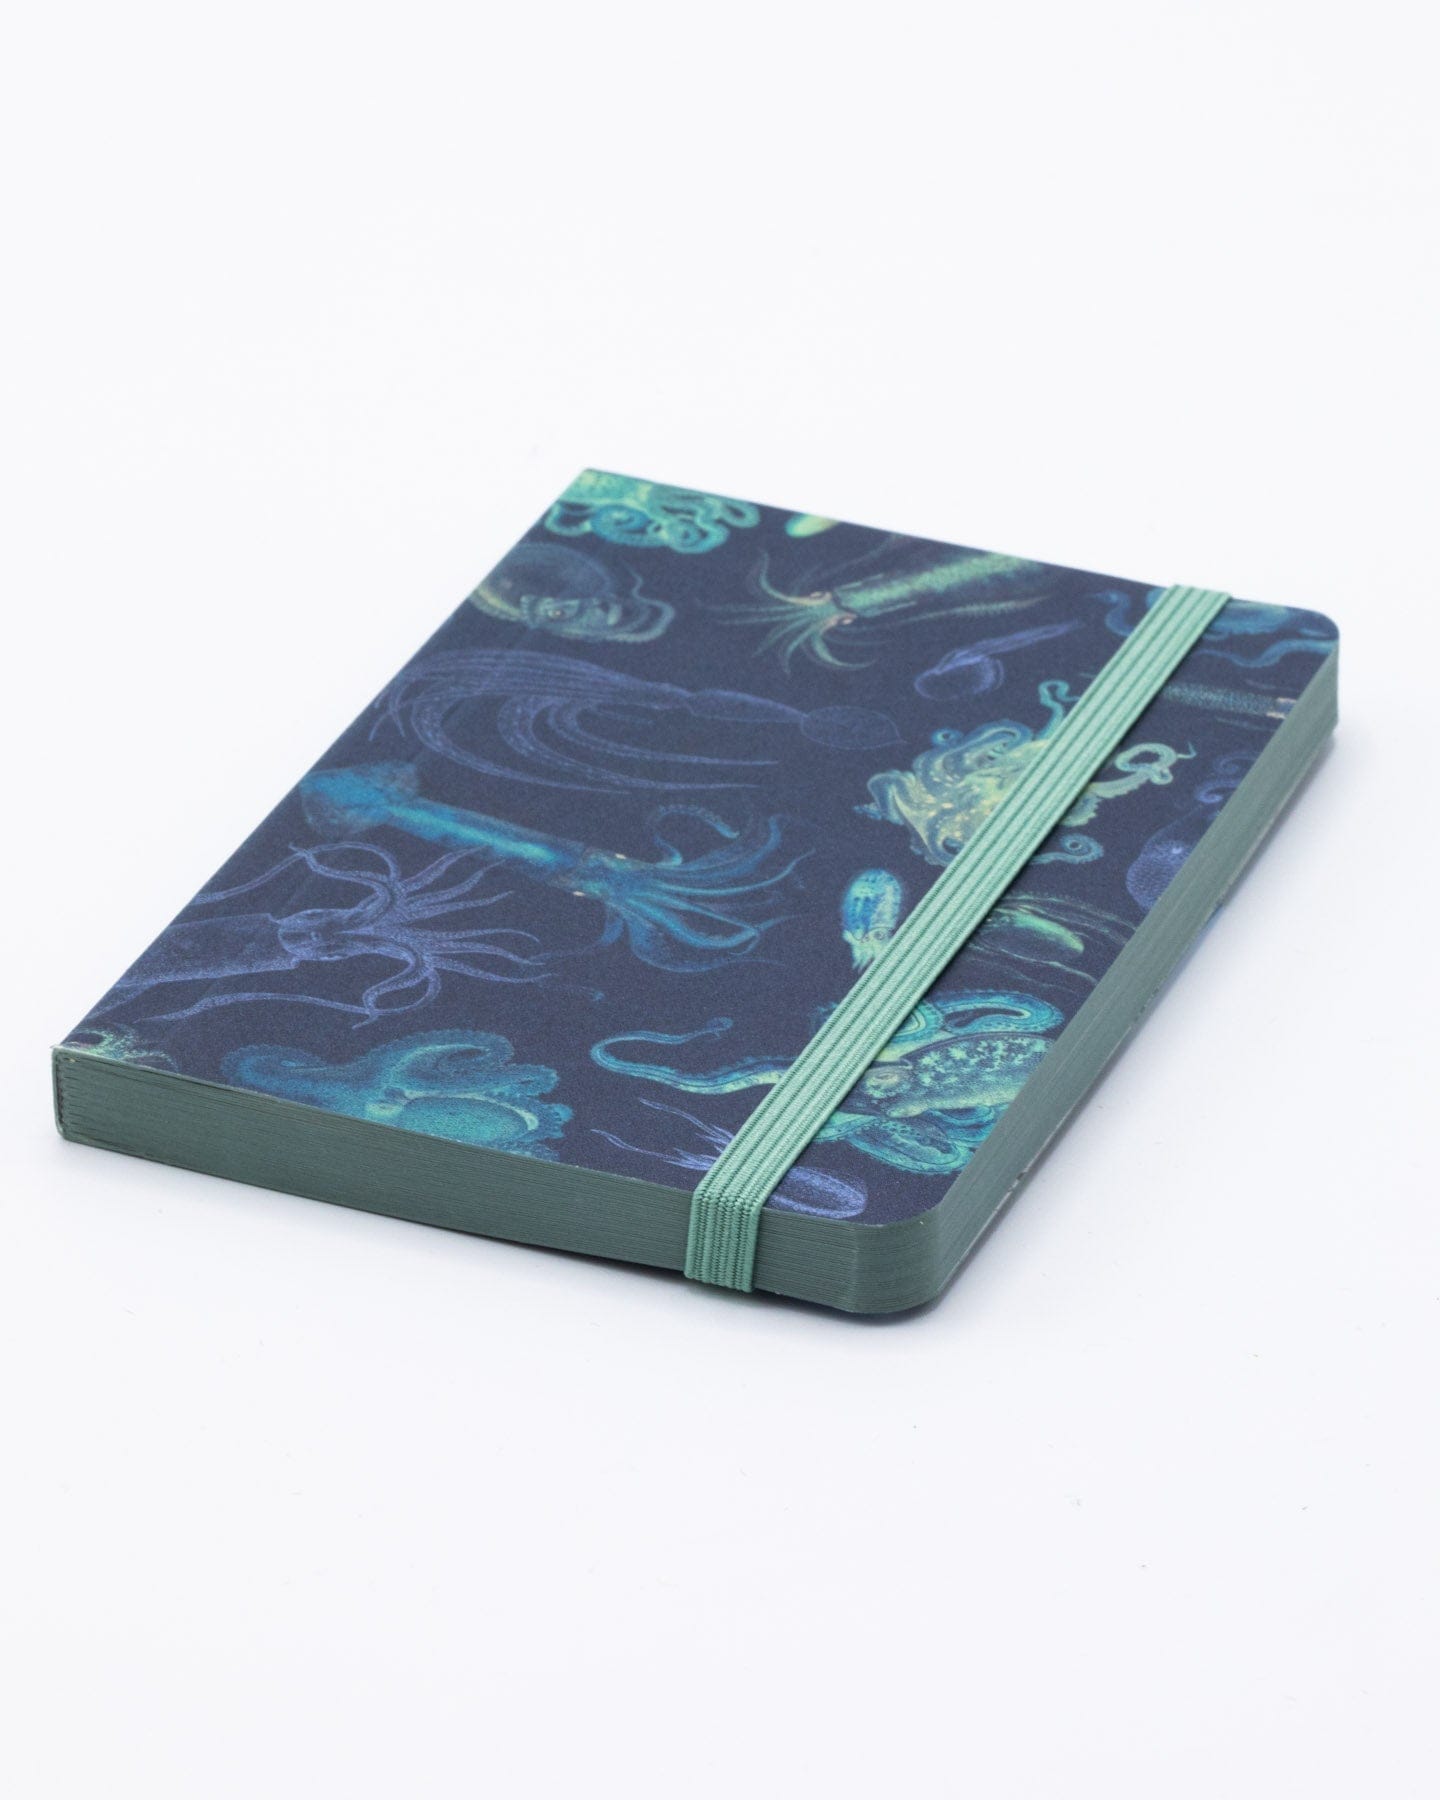 Sea Monsters: Octopus & Squid Observation Softcover Cognitive Surplus